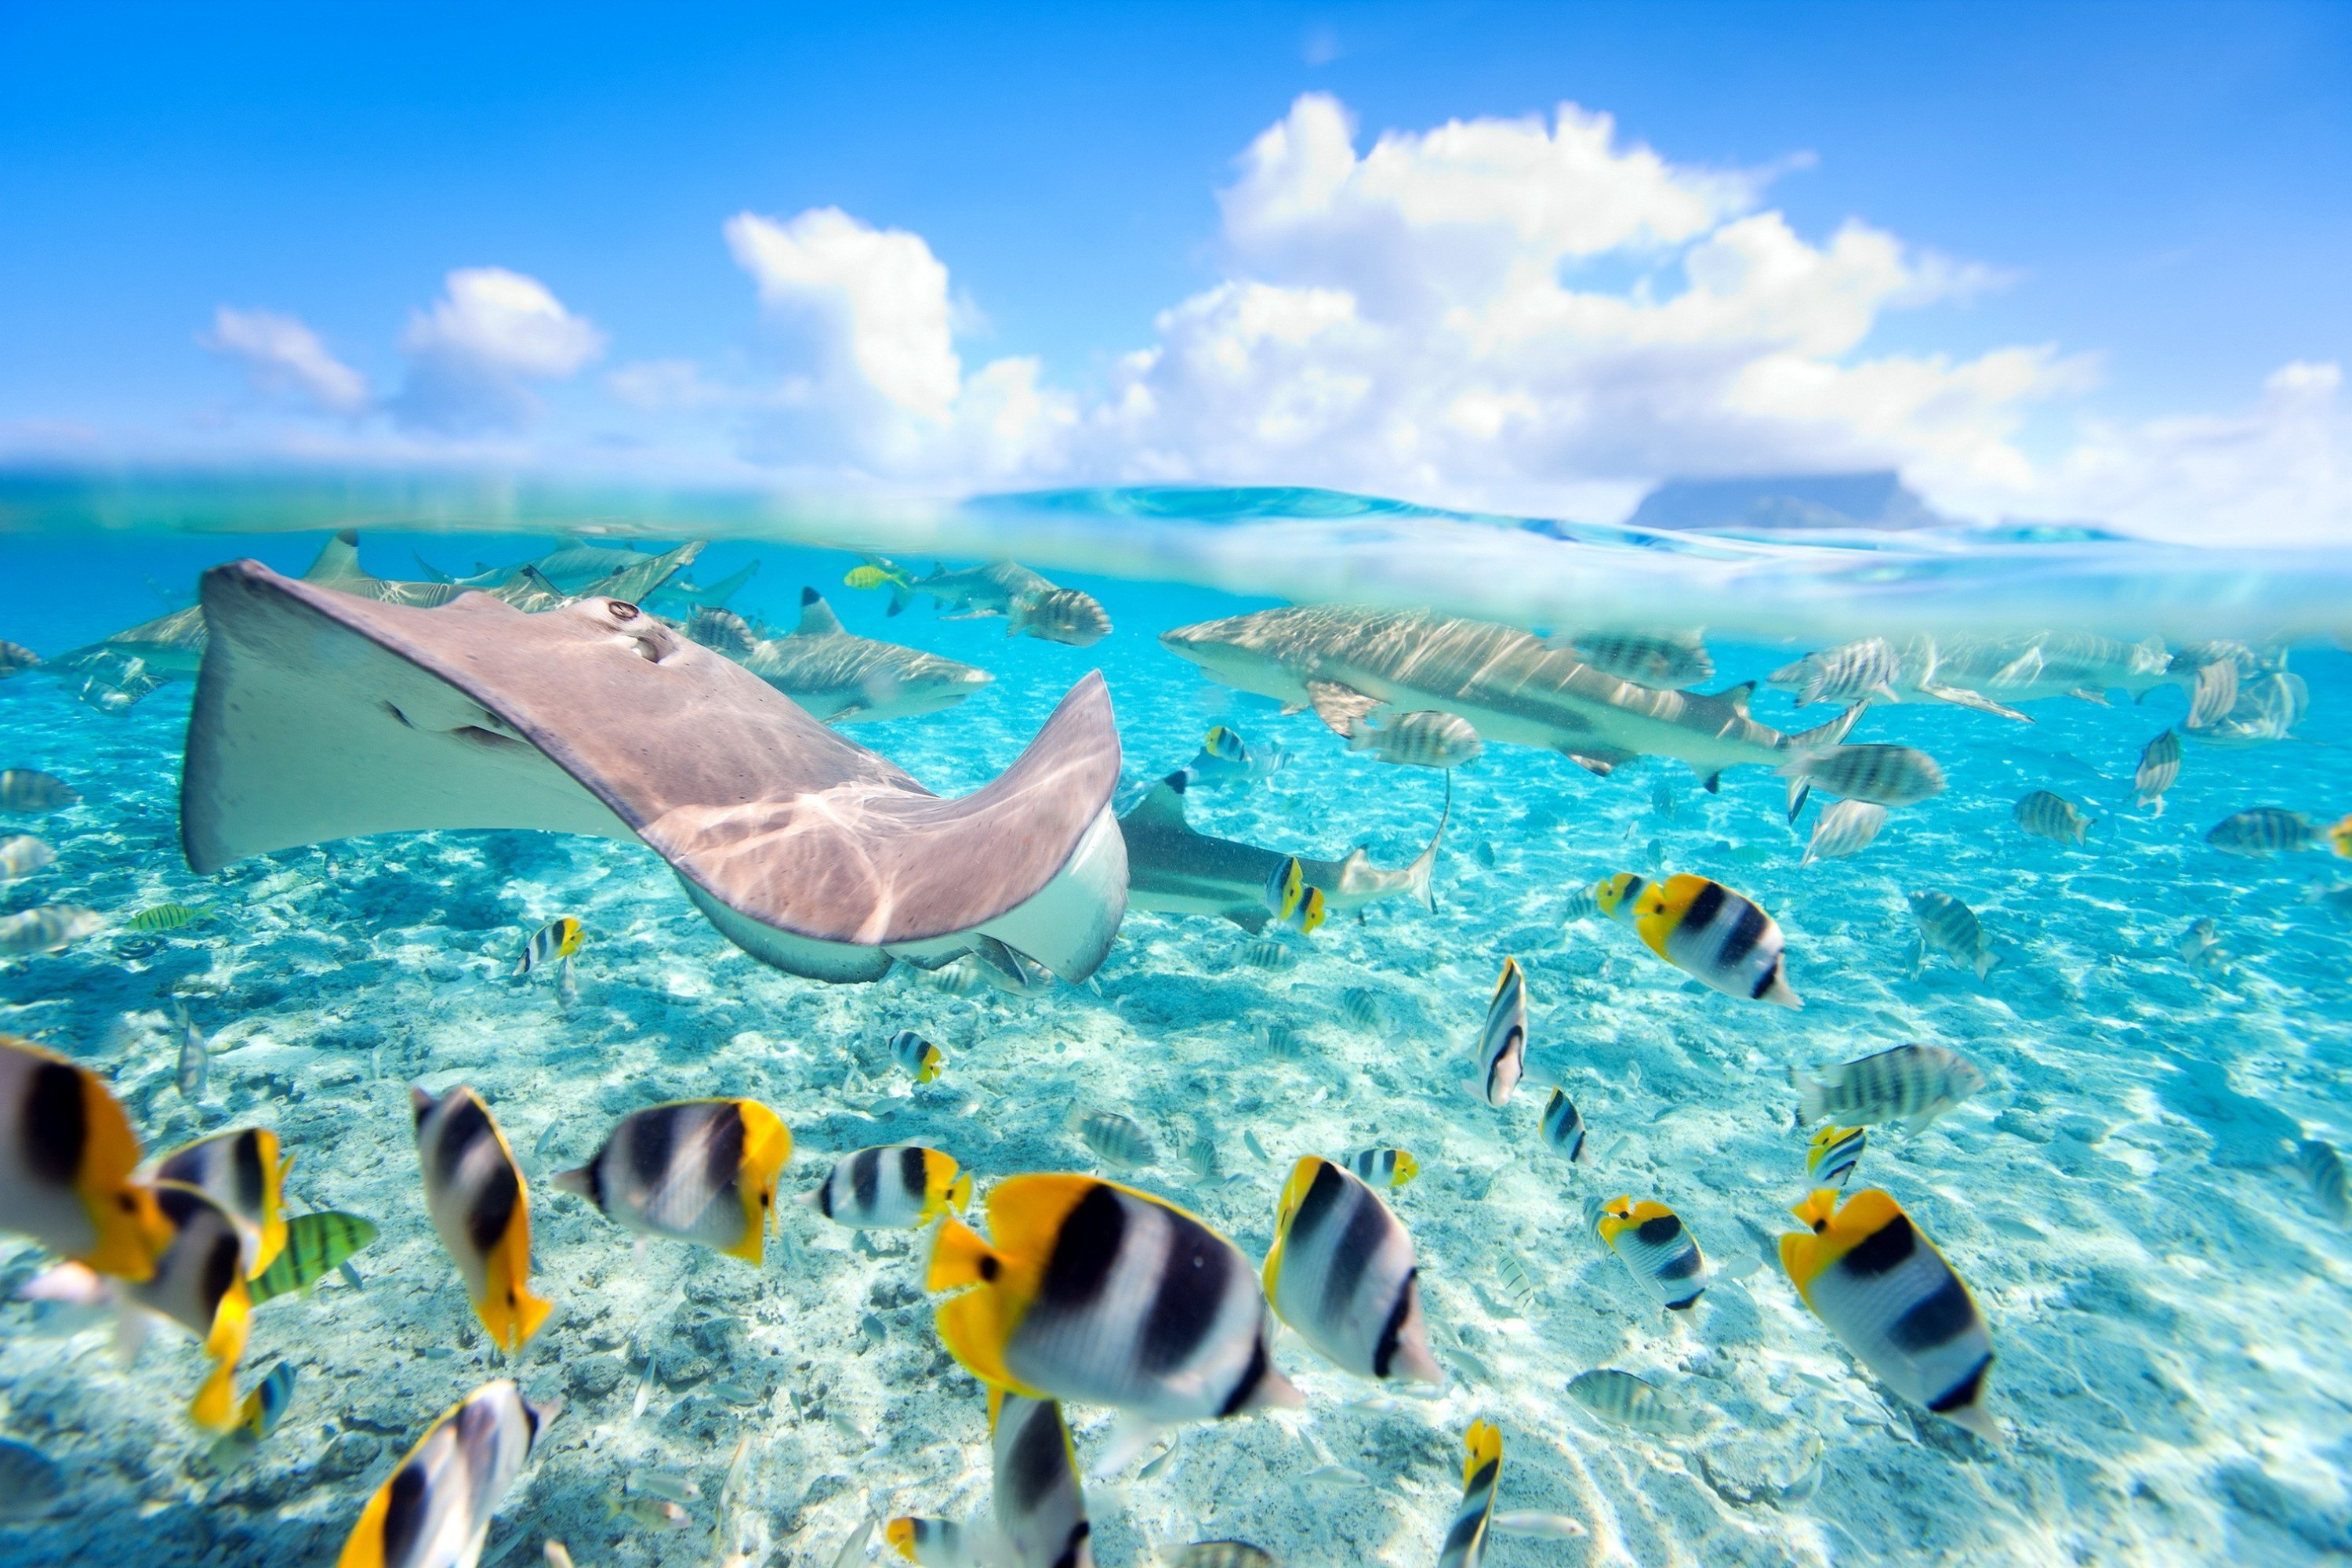 Stingray HD Wallpaper and Background Image